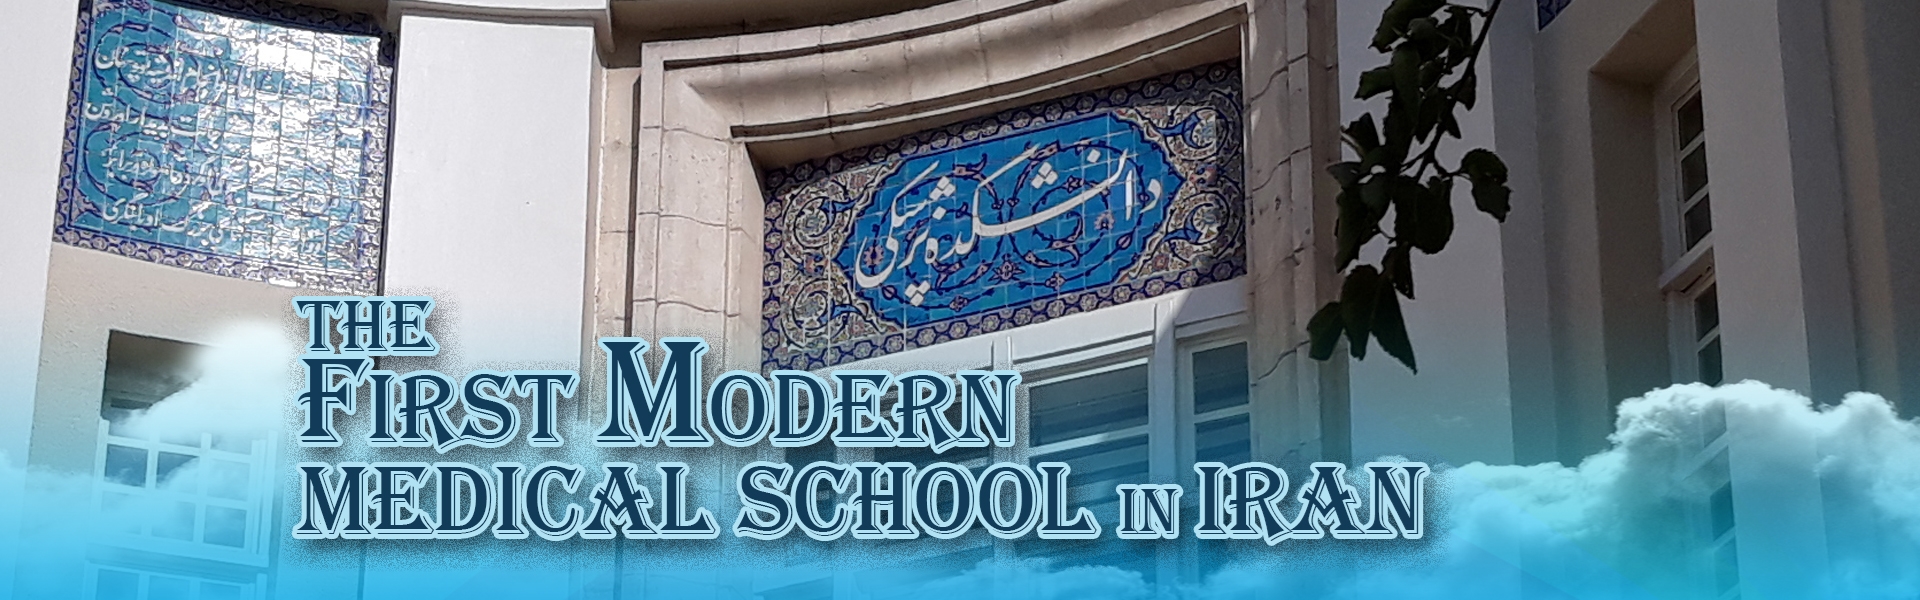 The first modern medical school in Iran